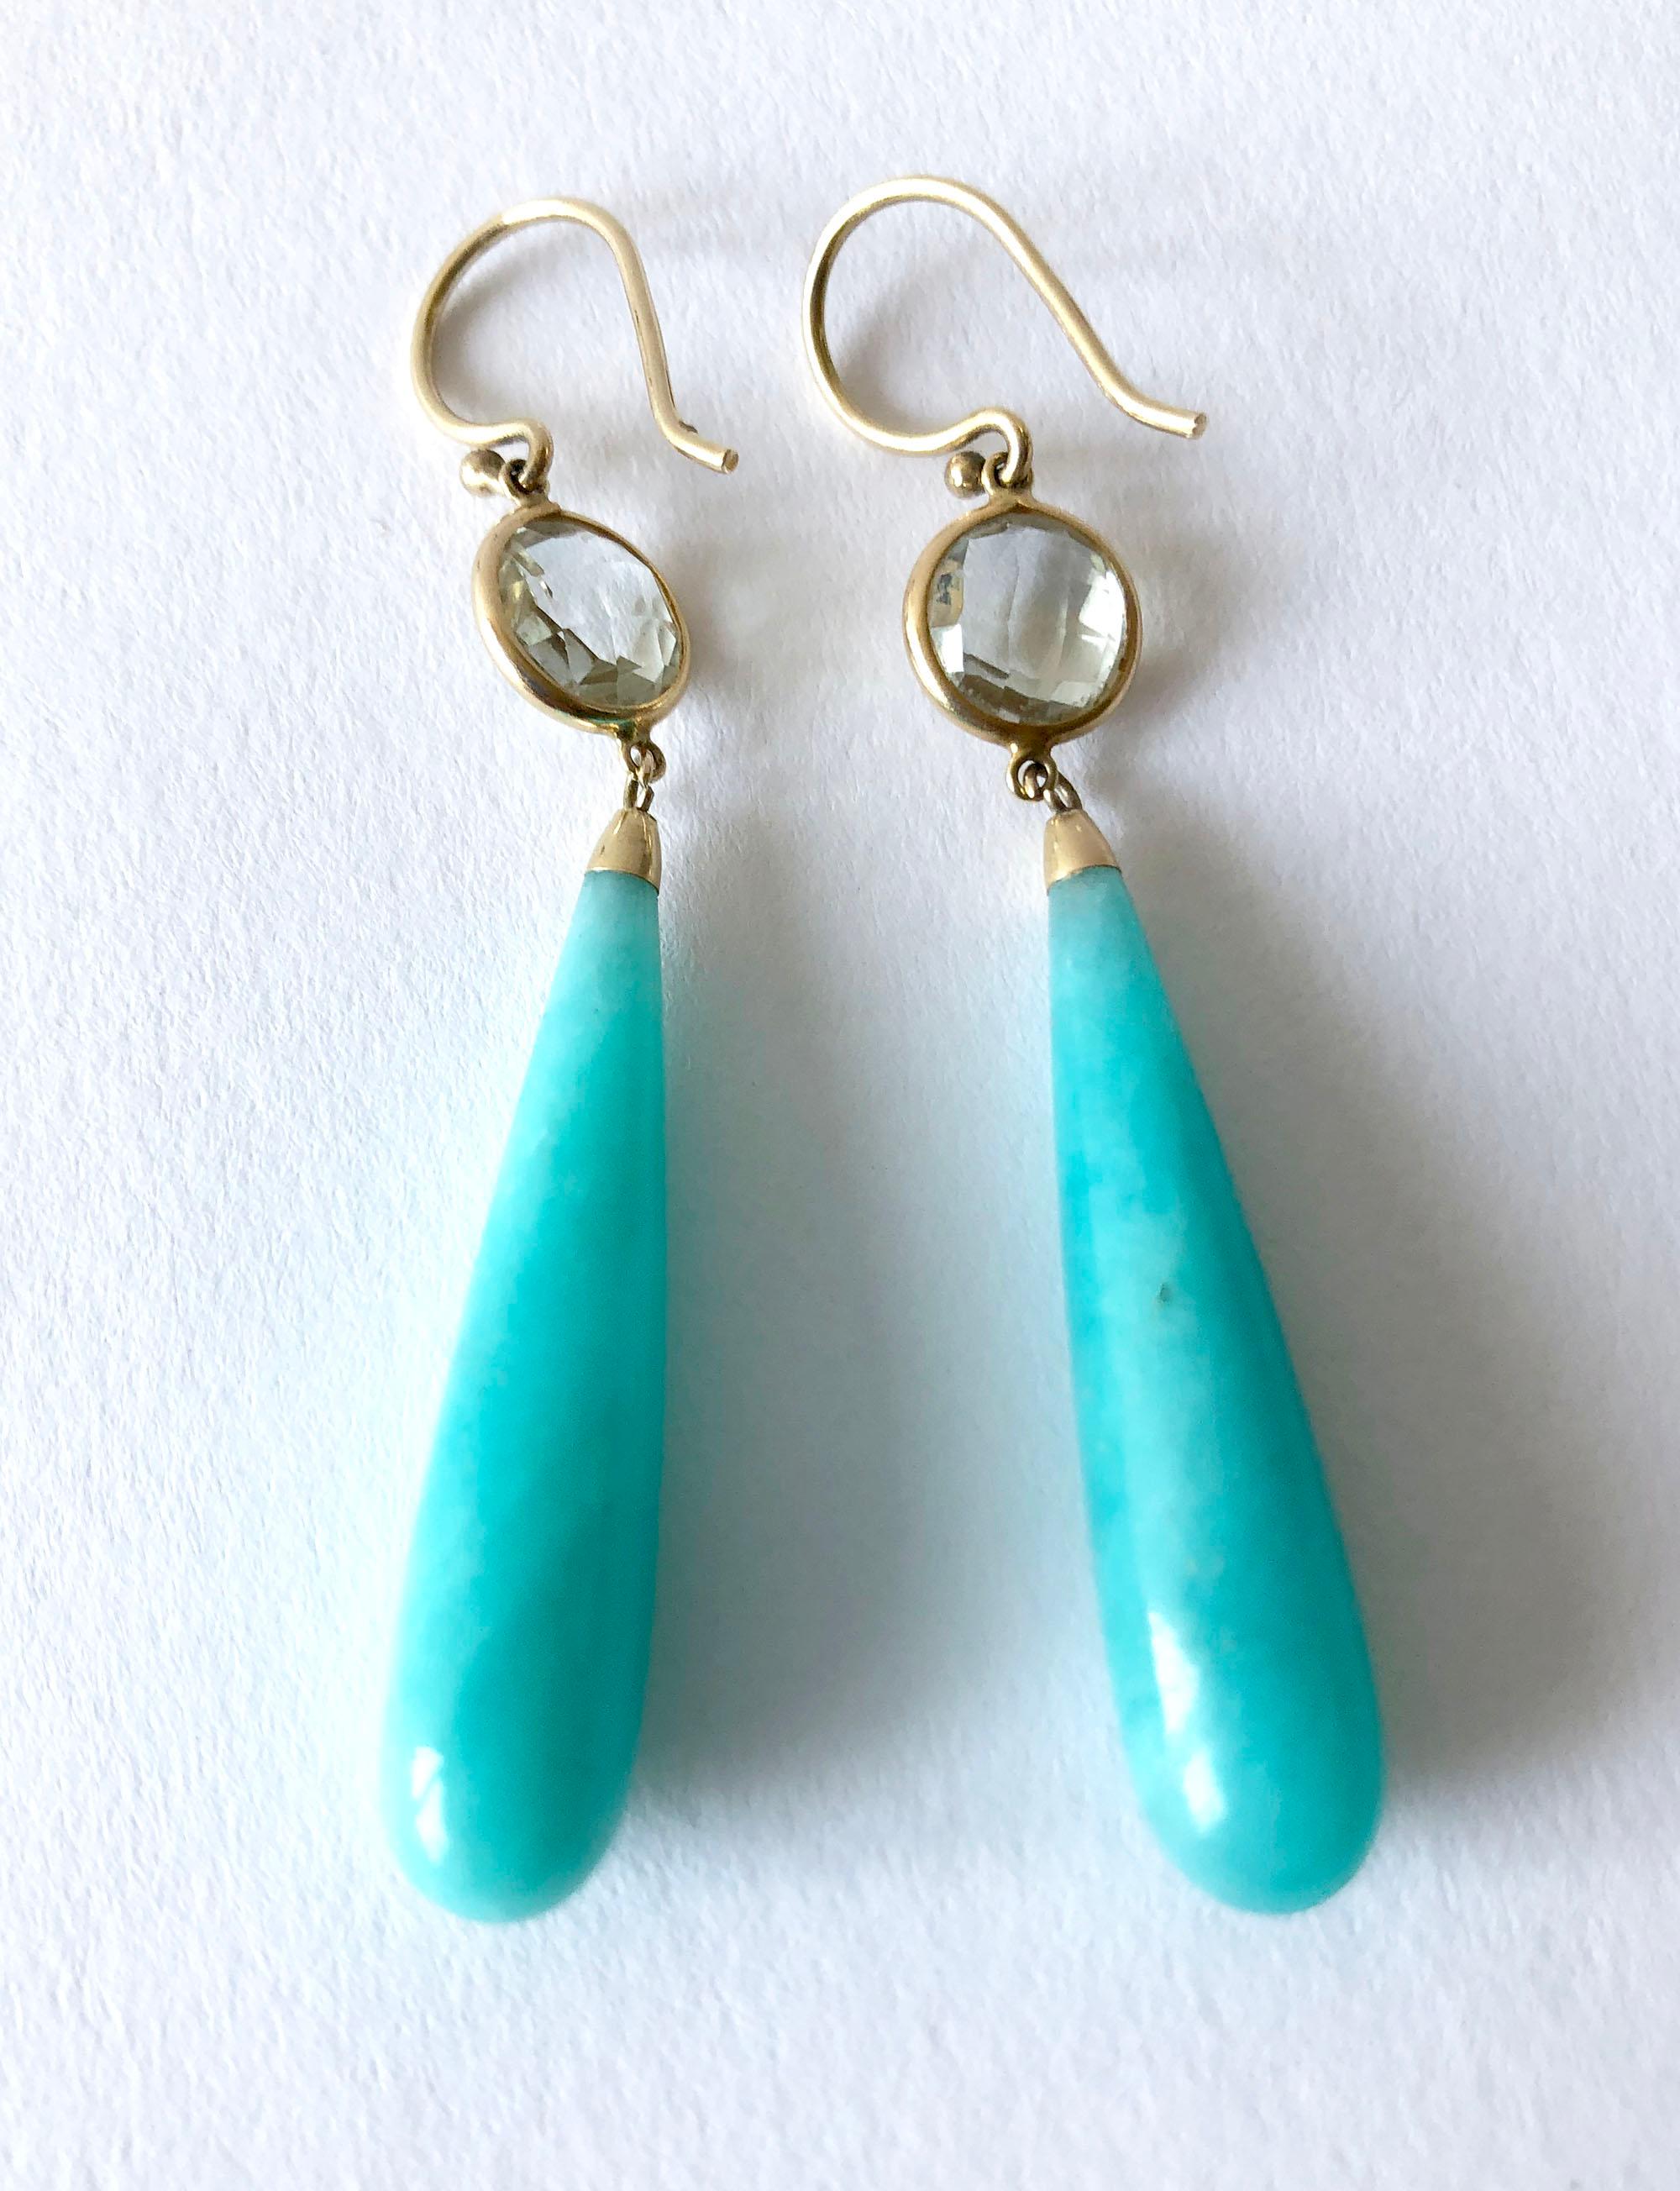 Amazonite drop earrings, with faceted crystal trimmed in gold. Earrings measure 2.5